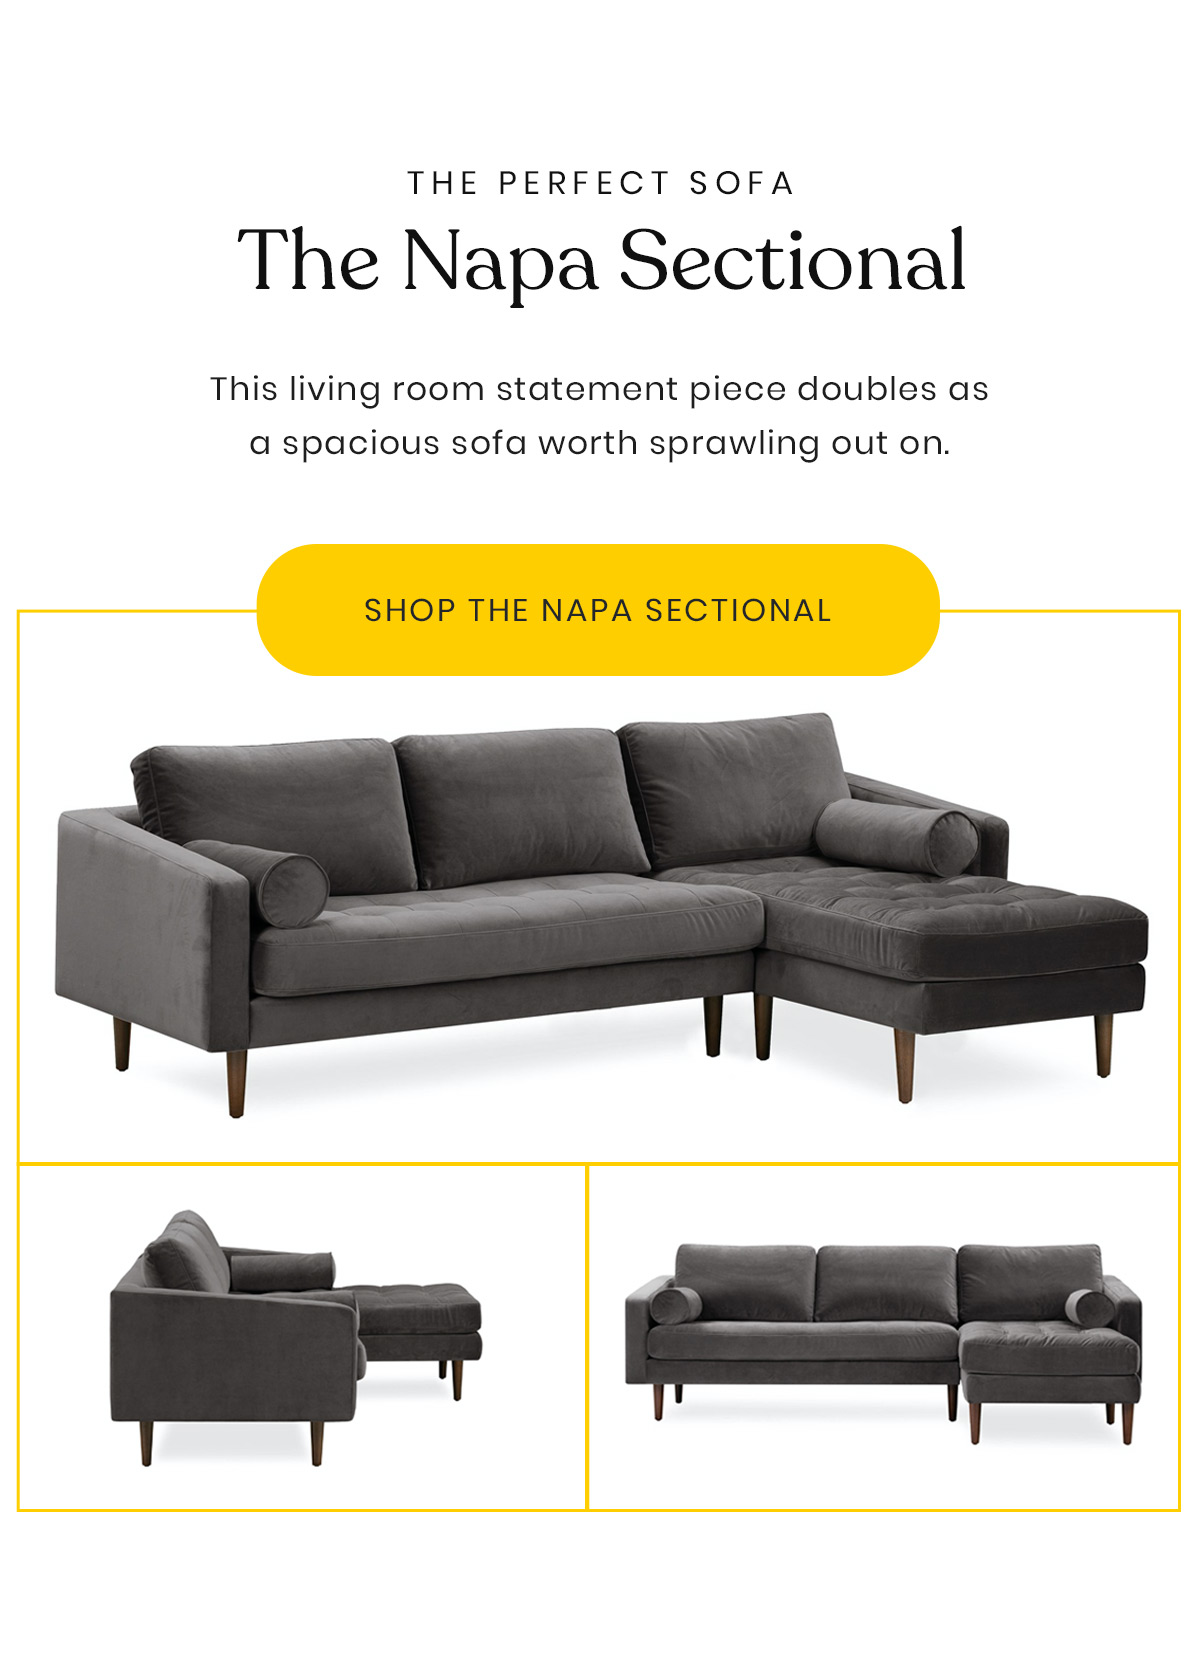 The Perfect Sofa | The Napa Sectional | This living room statement piece doubles as a spacious sofa worth sprawling out on. | Shop The Napa Sectional